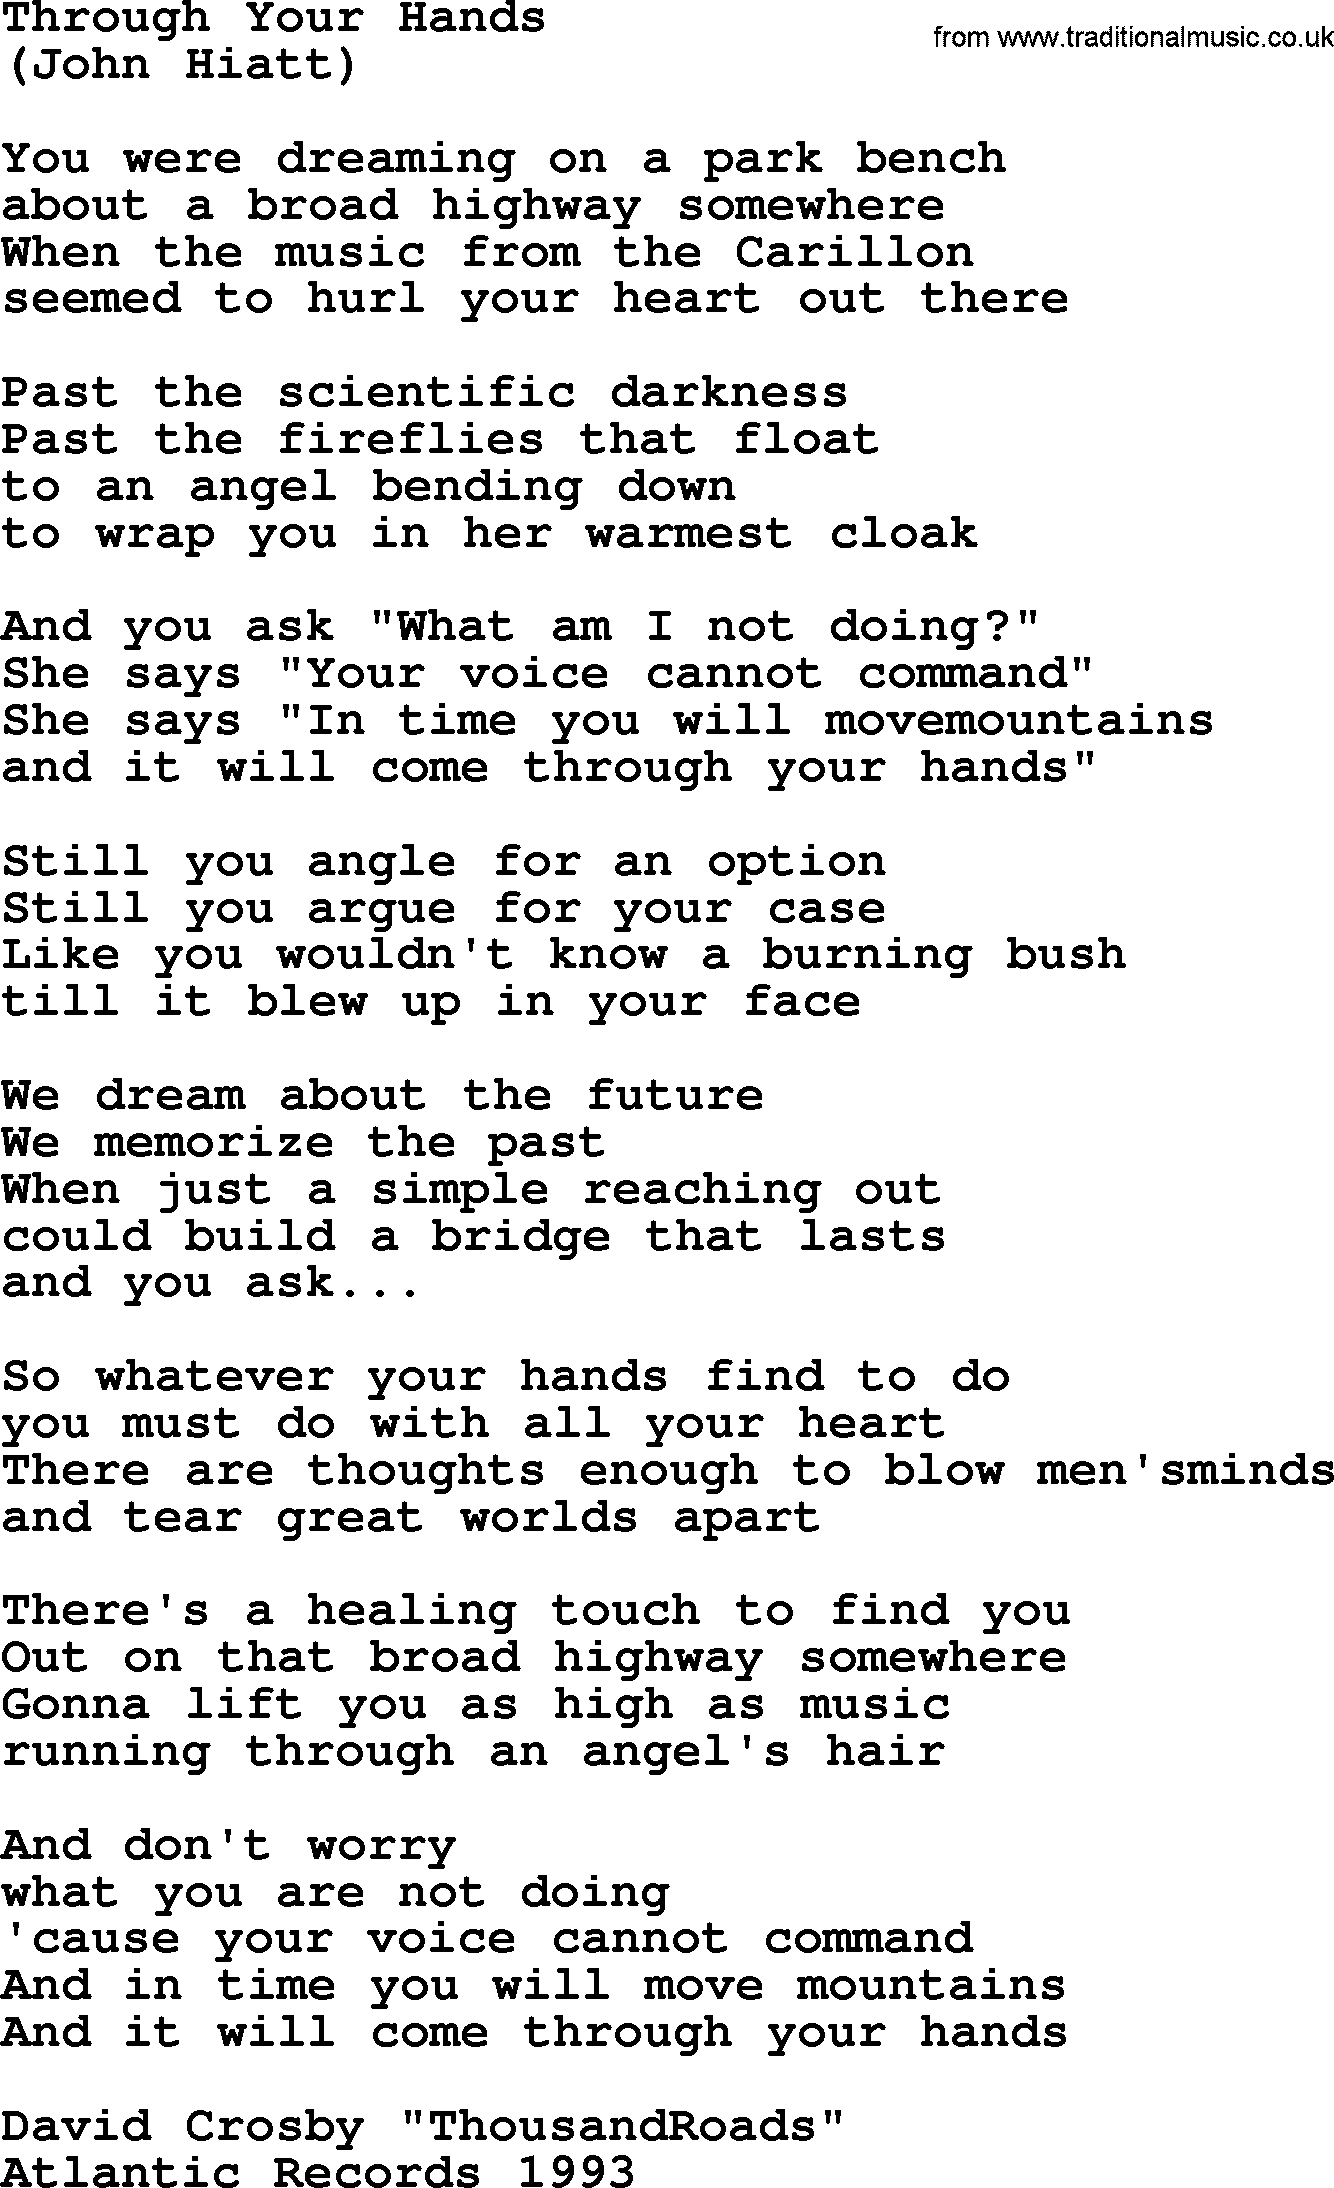 The Byrds song Through Your Hands, lyrics